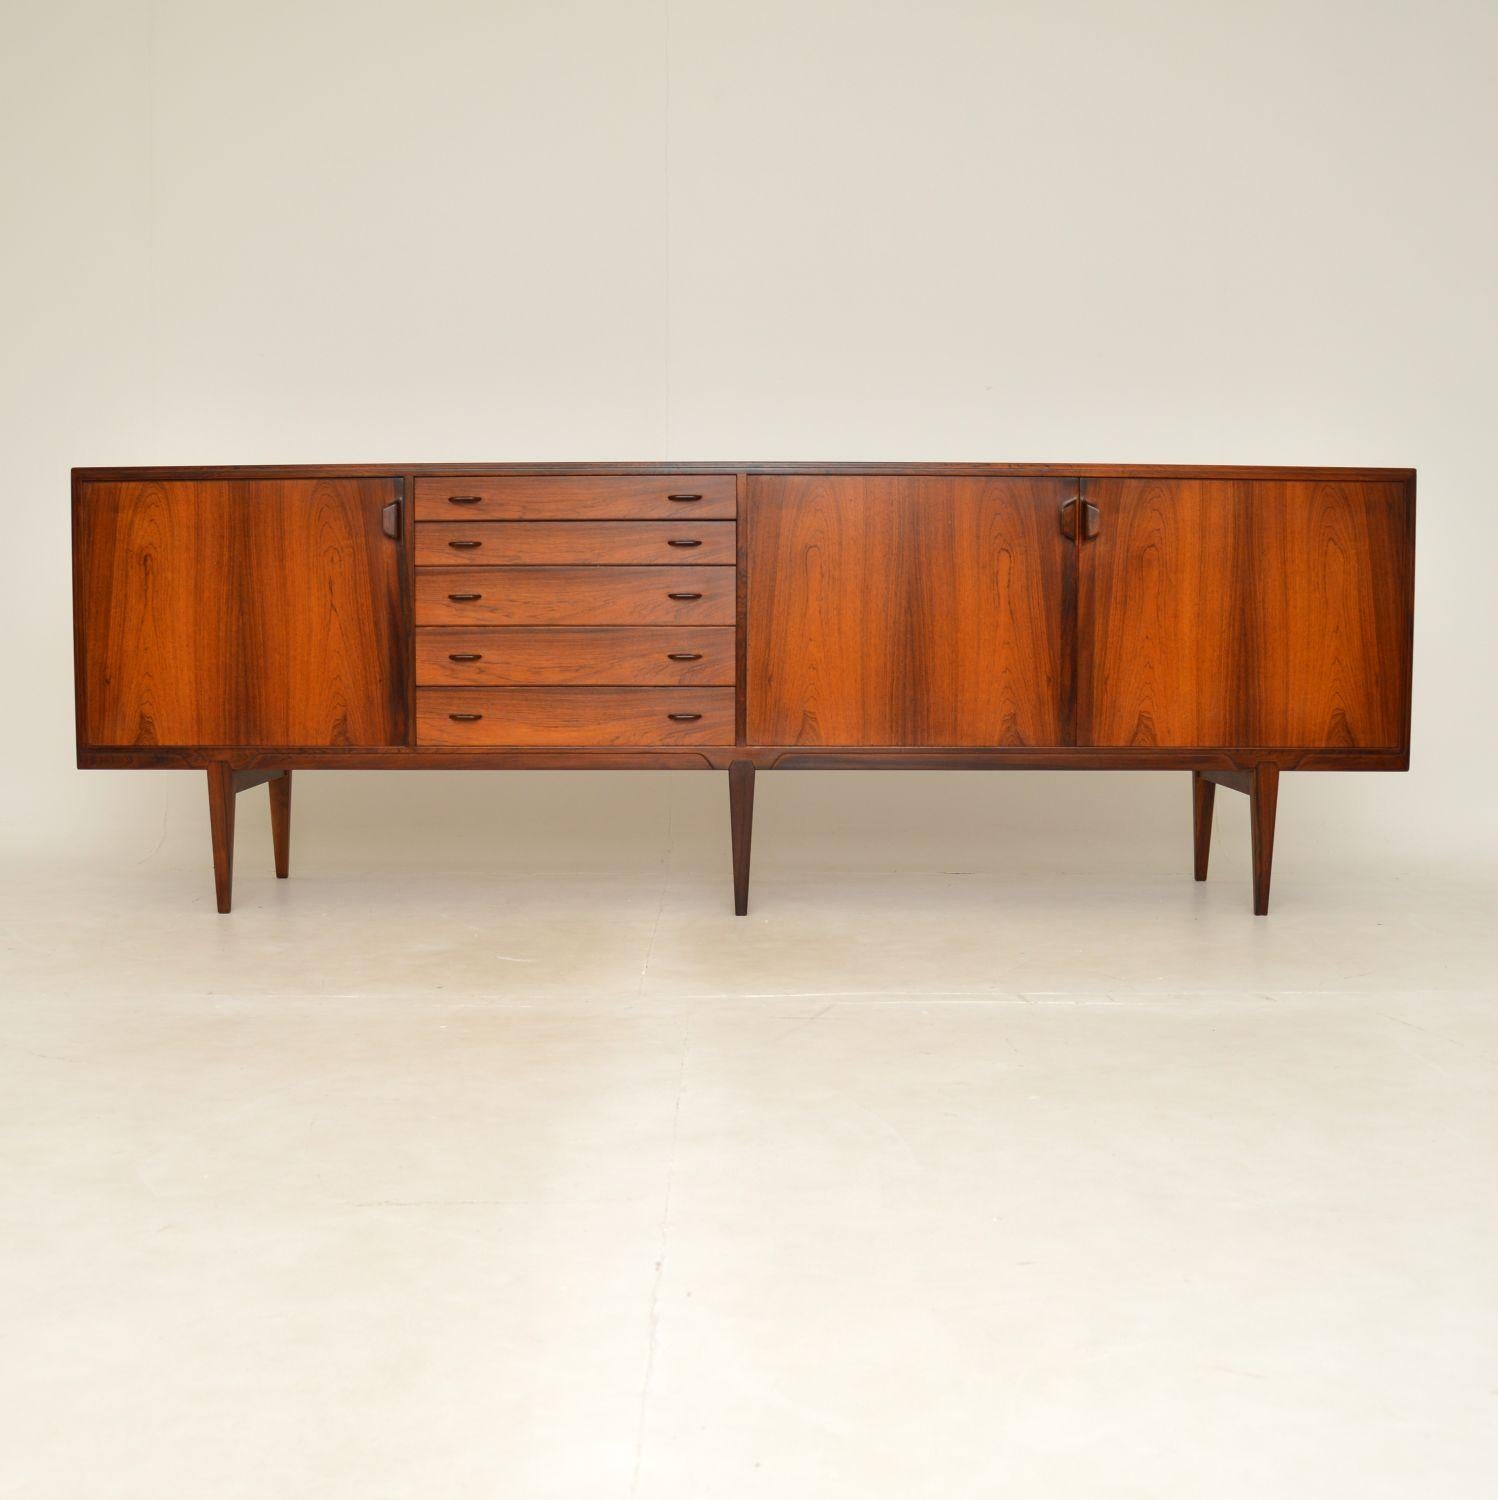 An exceptional Danish vintage sideboard in wood. This was designed by Henry Rosengren Hansen for Brande Mobelfabrik, it was made in Denmark in the 1960’s.

The quality is outstanding, this sits on six beautifully tapered legs and has gorgeous